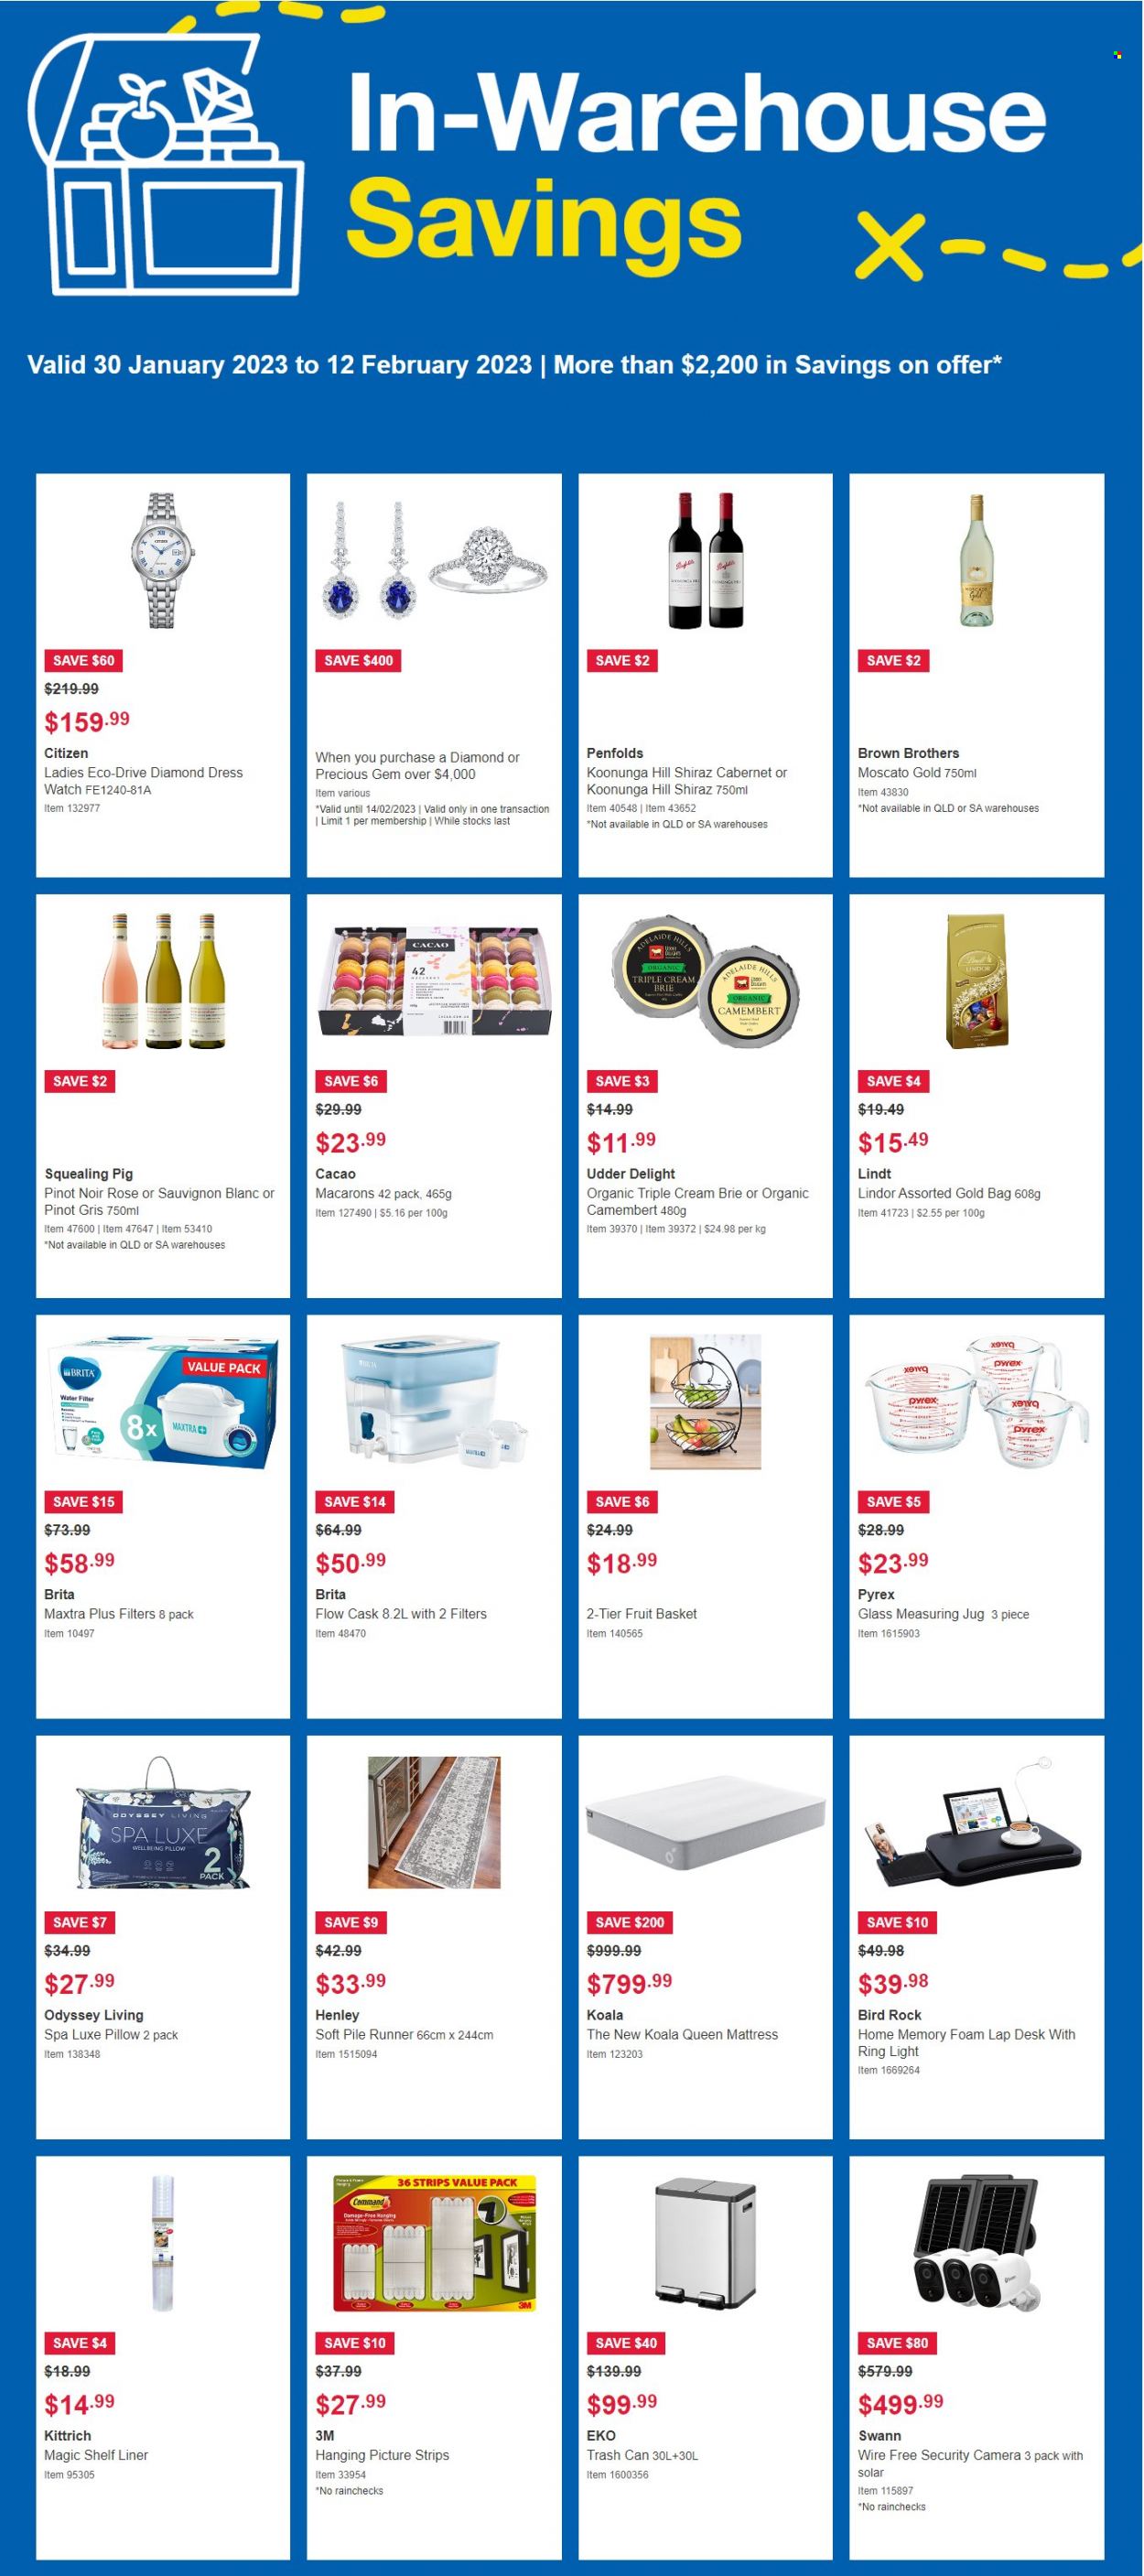 thumbnail - Costco Catalogue - 30 Jan 2023 - 12 Feb 2023 - Sales products - Lindt, Lindor, macaroons, Cabernet Sauvignon, red wine, white wine, wine, Pinot Noir, Moscato, Shiraz, Pinot Grigio, Sauvignon Blanc, rosé wine, BROTHERS, bag, basket, trash can, Pyrex, pillow, water filter, Hill's, security camera, lapdesk, camera, shelves, mattress, desk, dress, watch. Page 1.